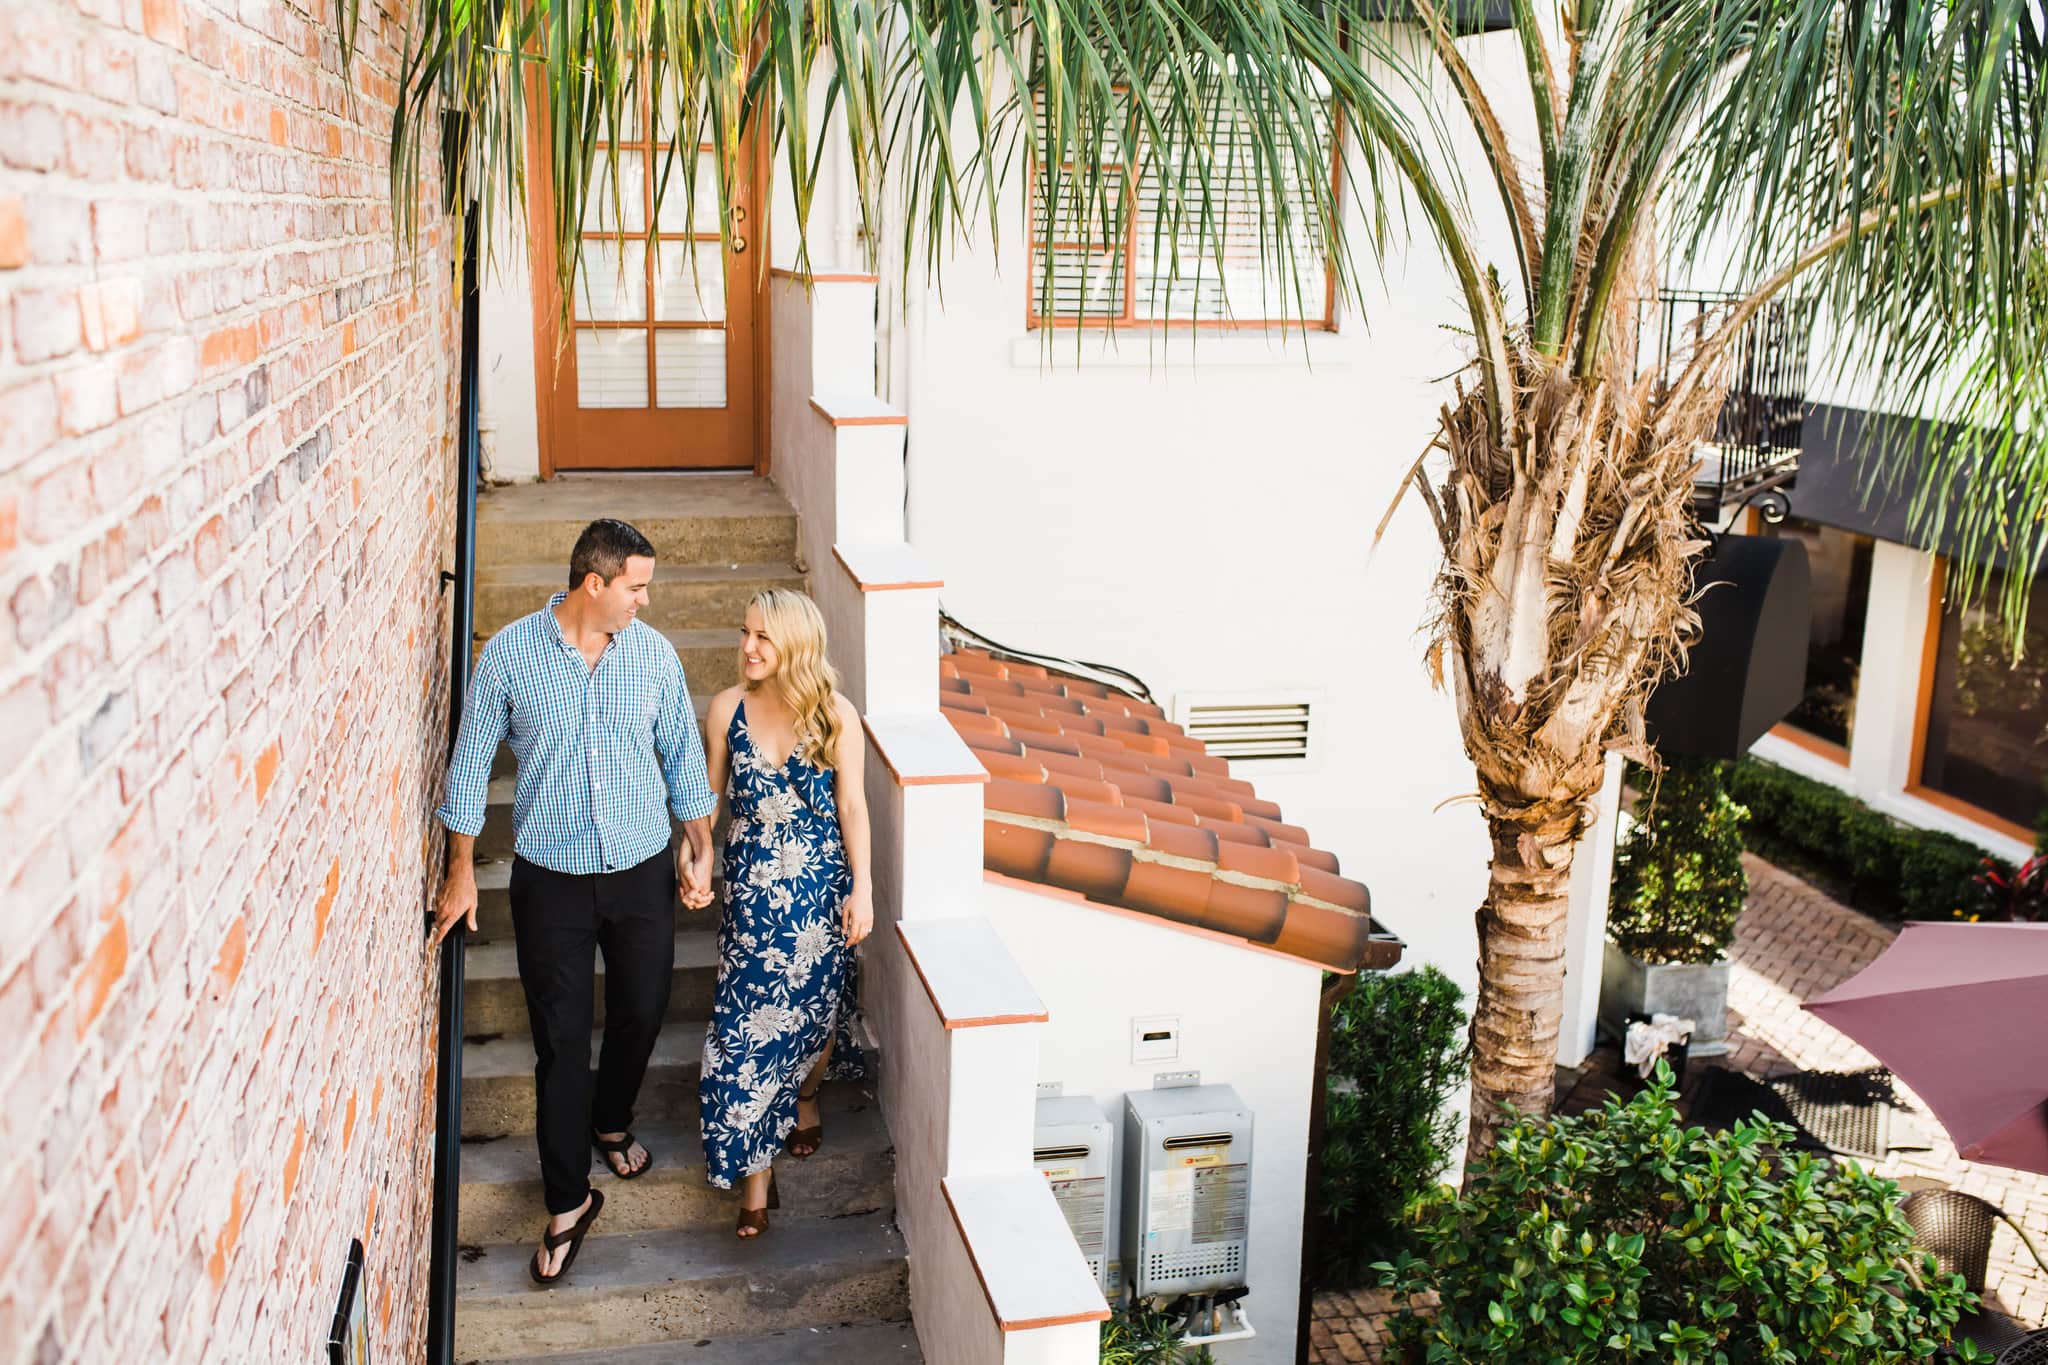 winter park engagement photos with palm trees and stucco ceilings